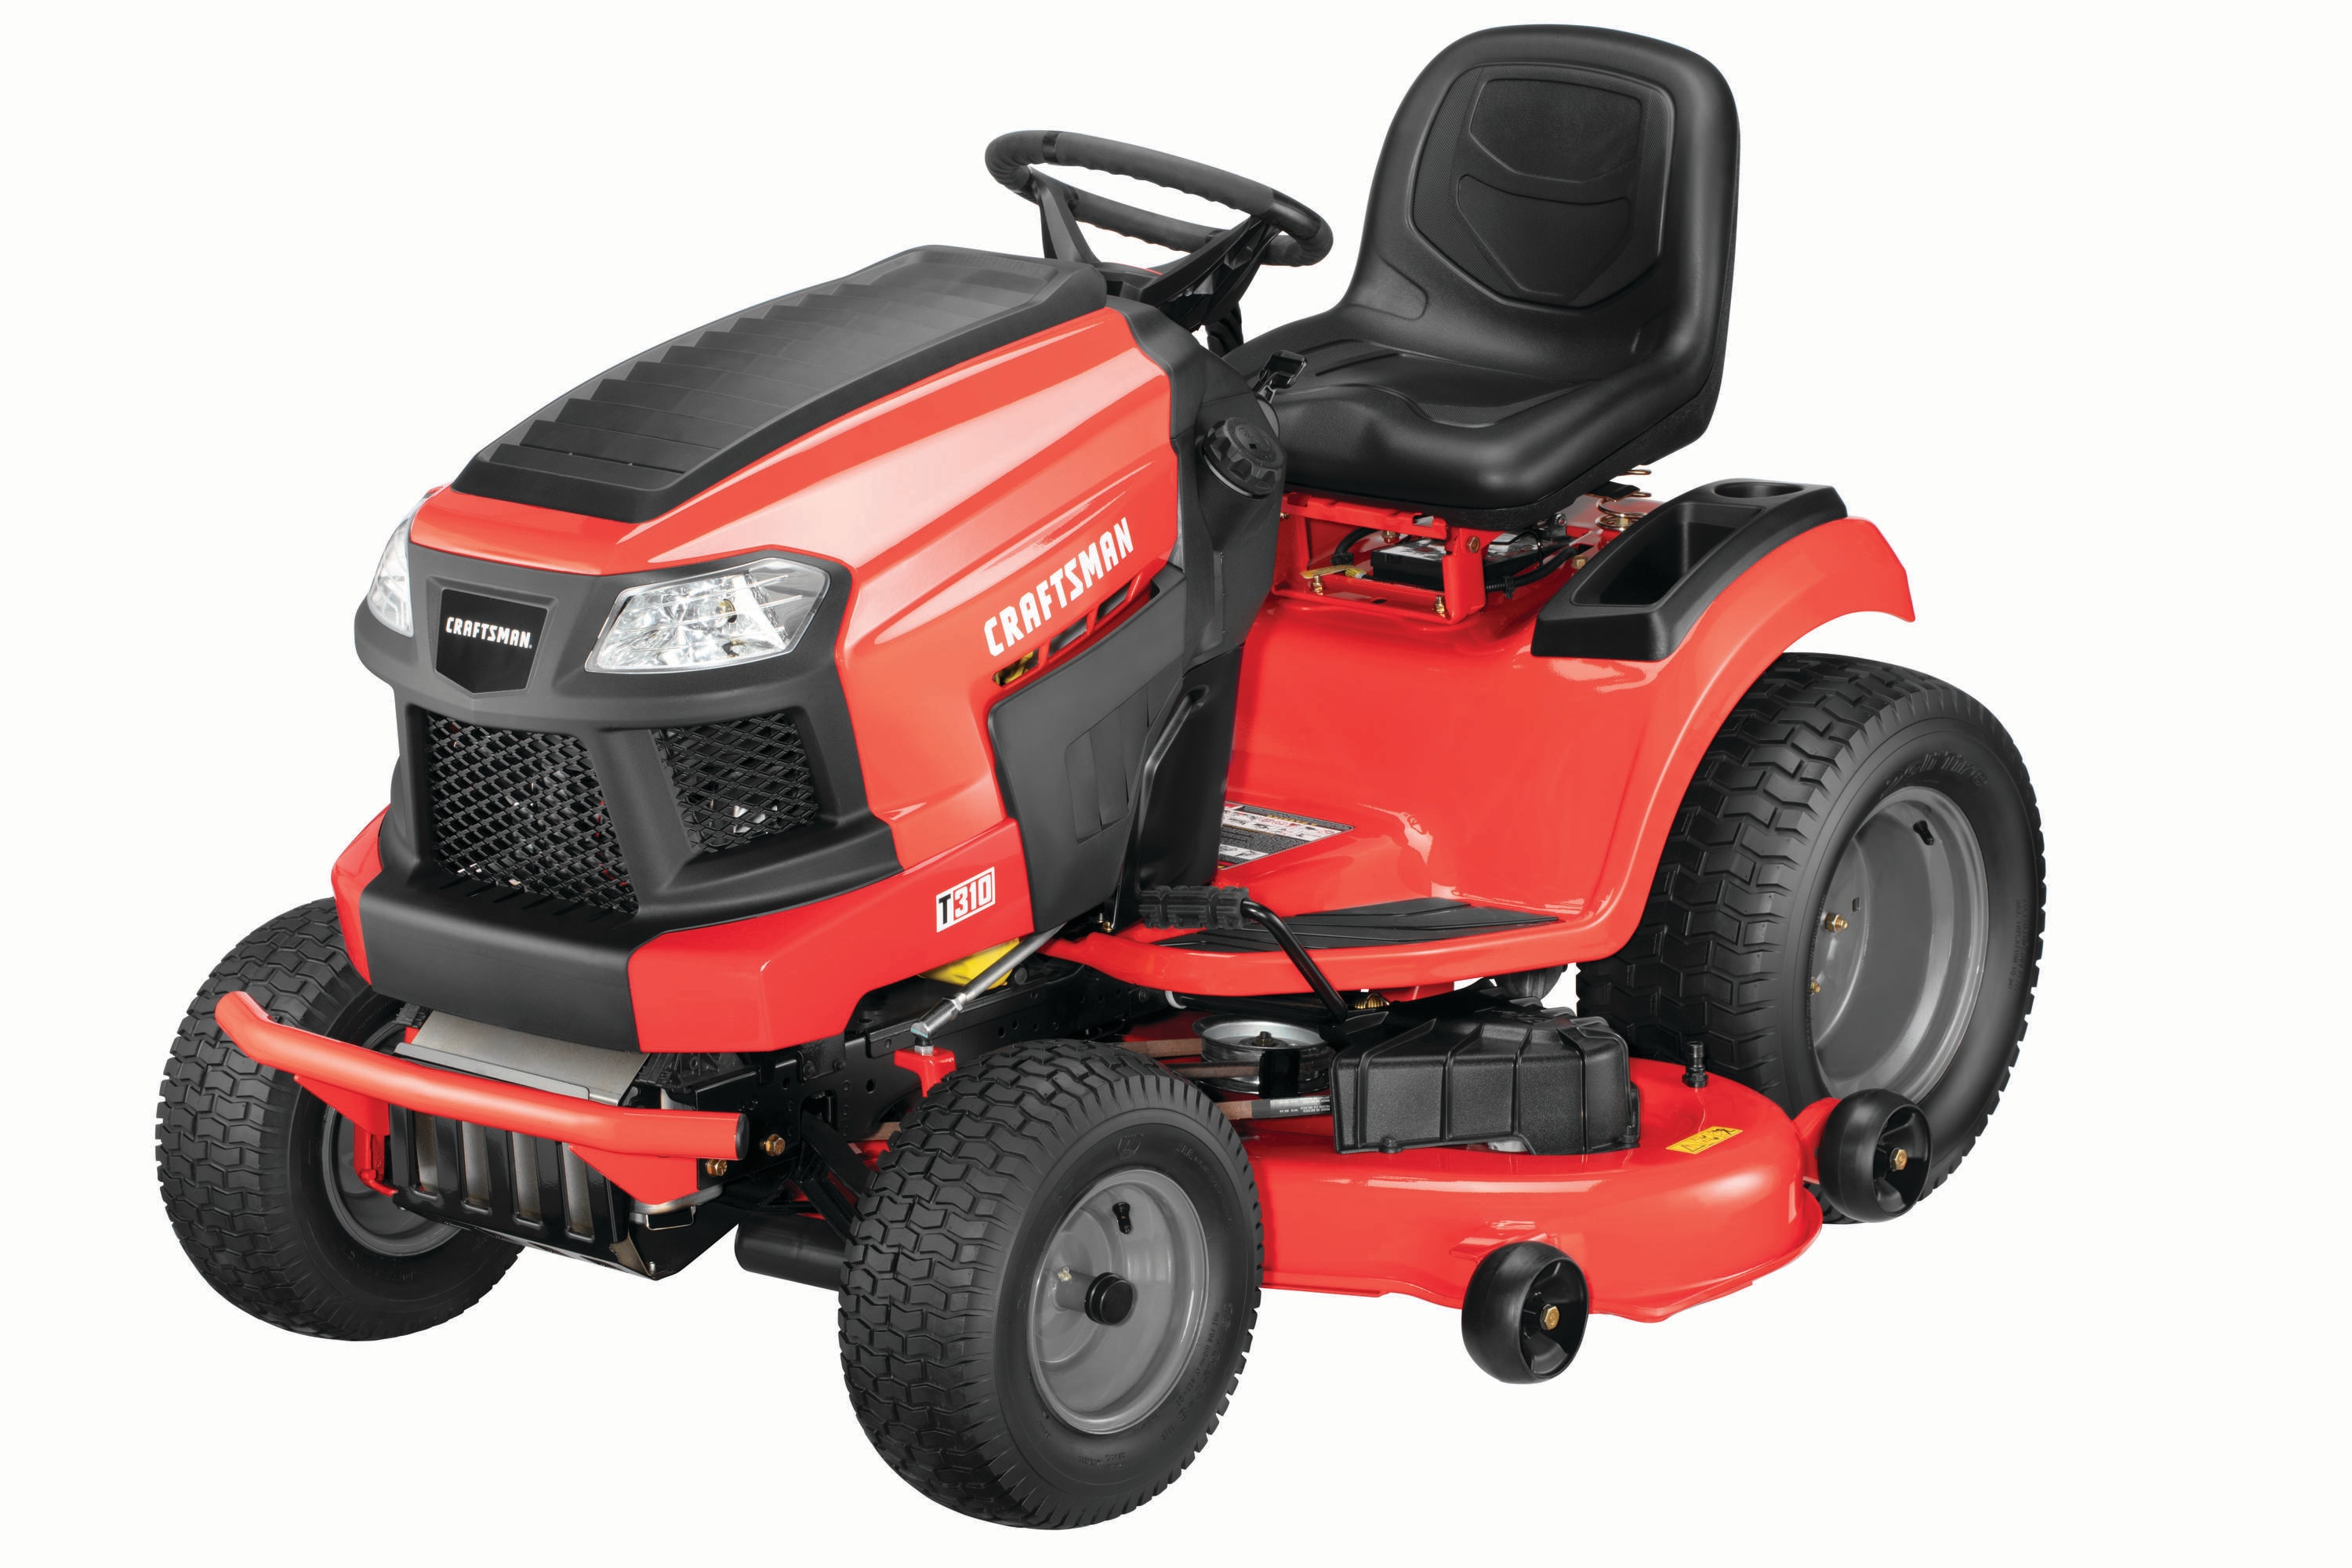 CRAFTSMAN T310 Turn Tight 54-in 24-HP V-twin Riding Lawn Mower At